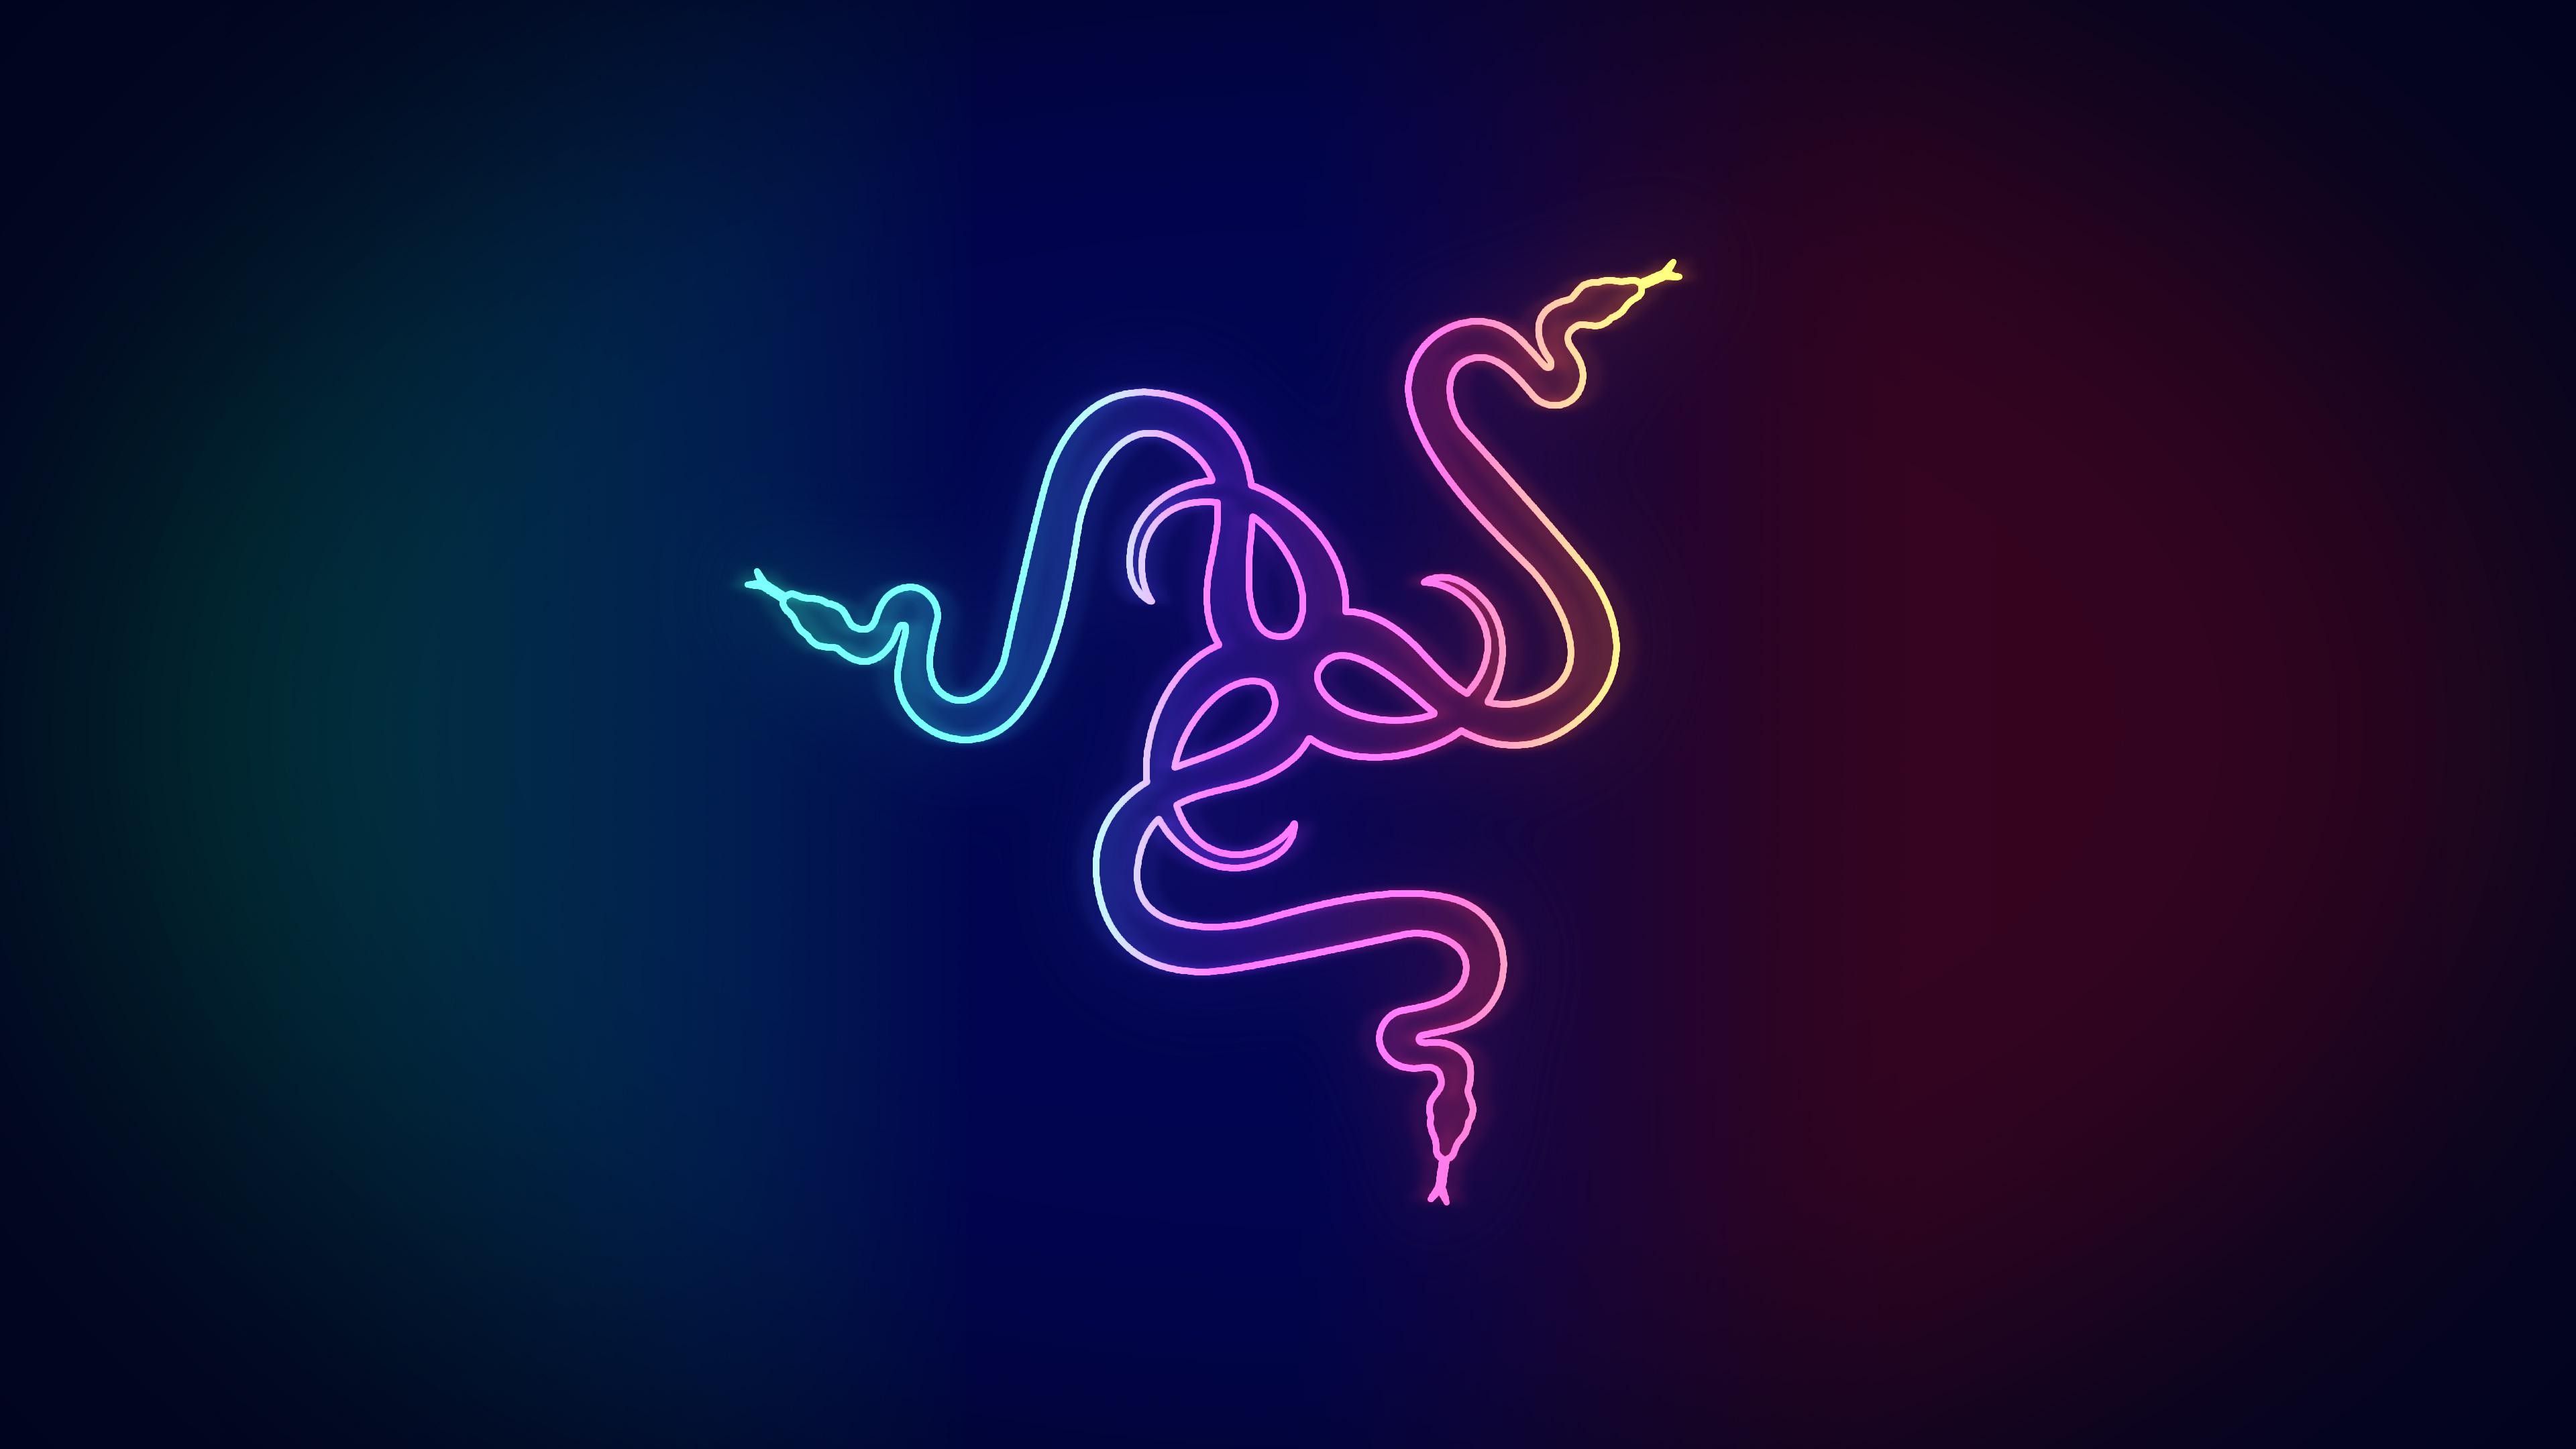 4K Wallpaper Razer Razer Wallpaper 4k On Wallpaperafari / Here are only the best razer gaming wallpaper. de uñas